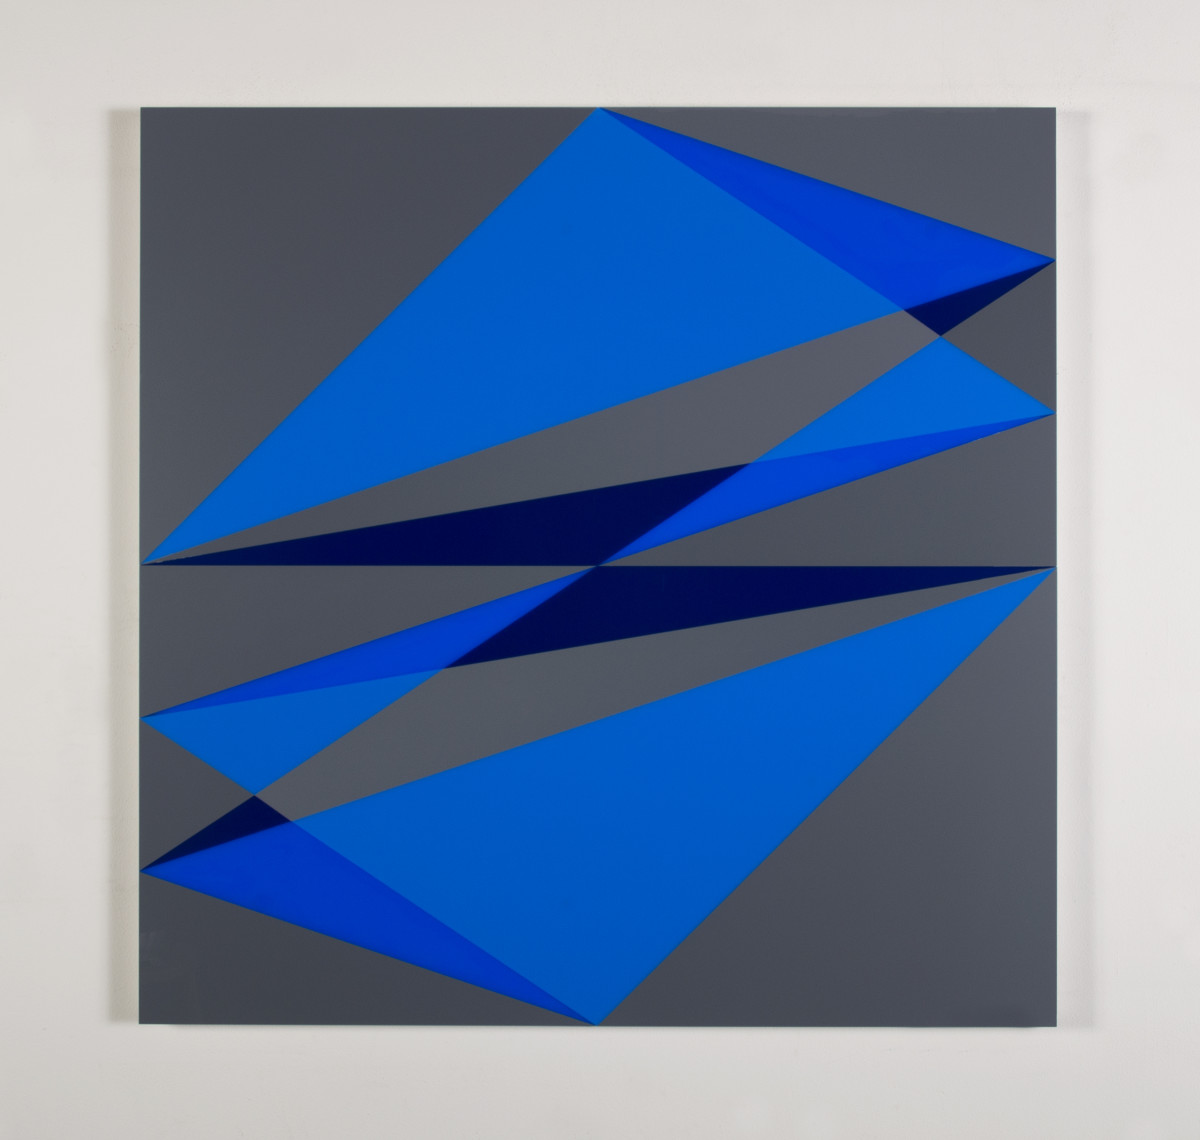 Composition in 2648 Blue, 2051 Blue, and 2114 Blue on 3001 Gray by Brian Zink 